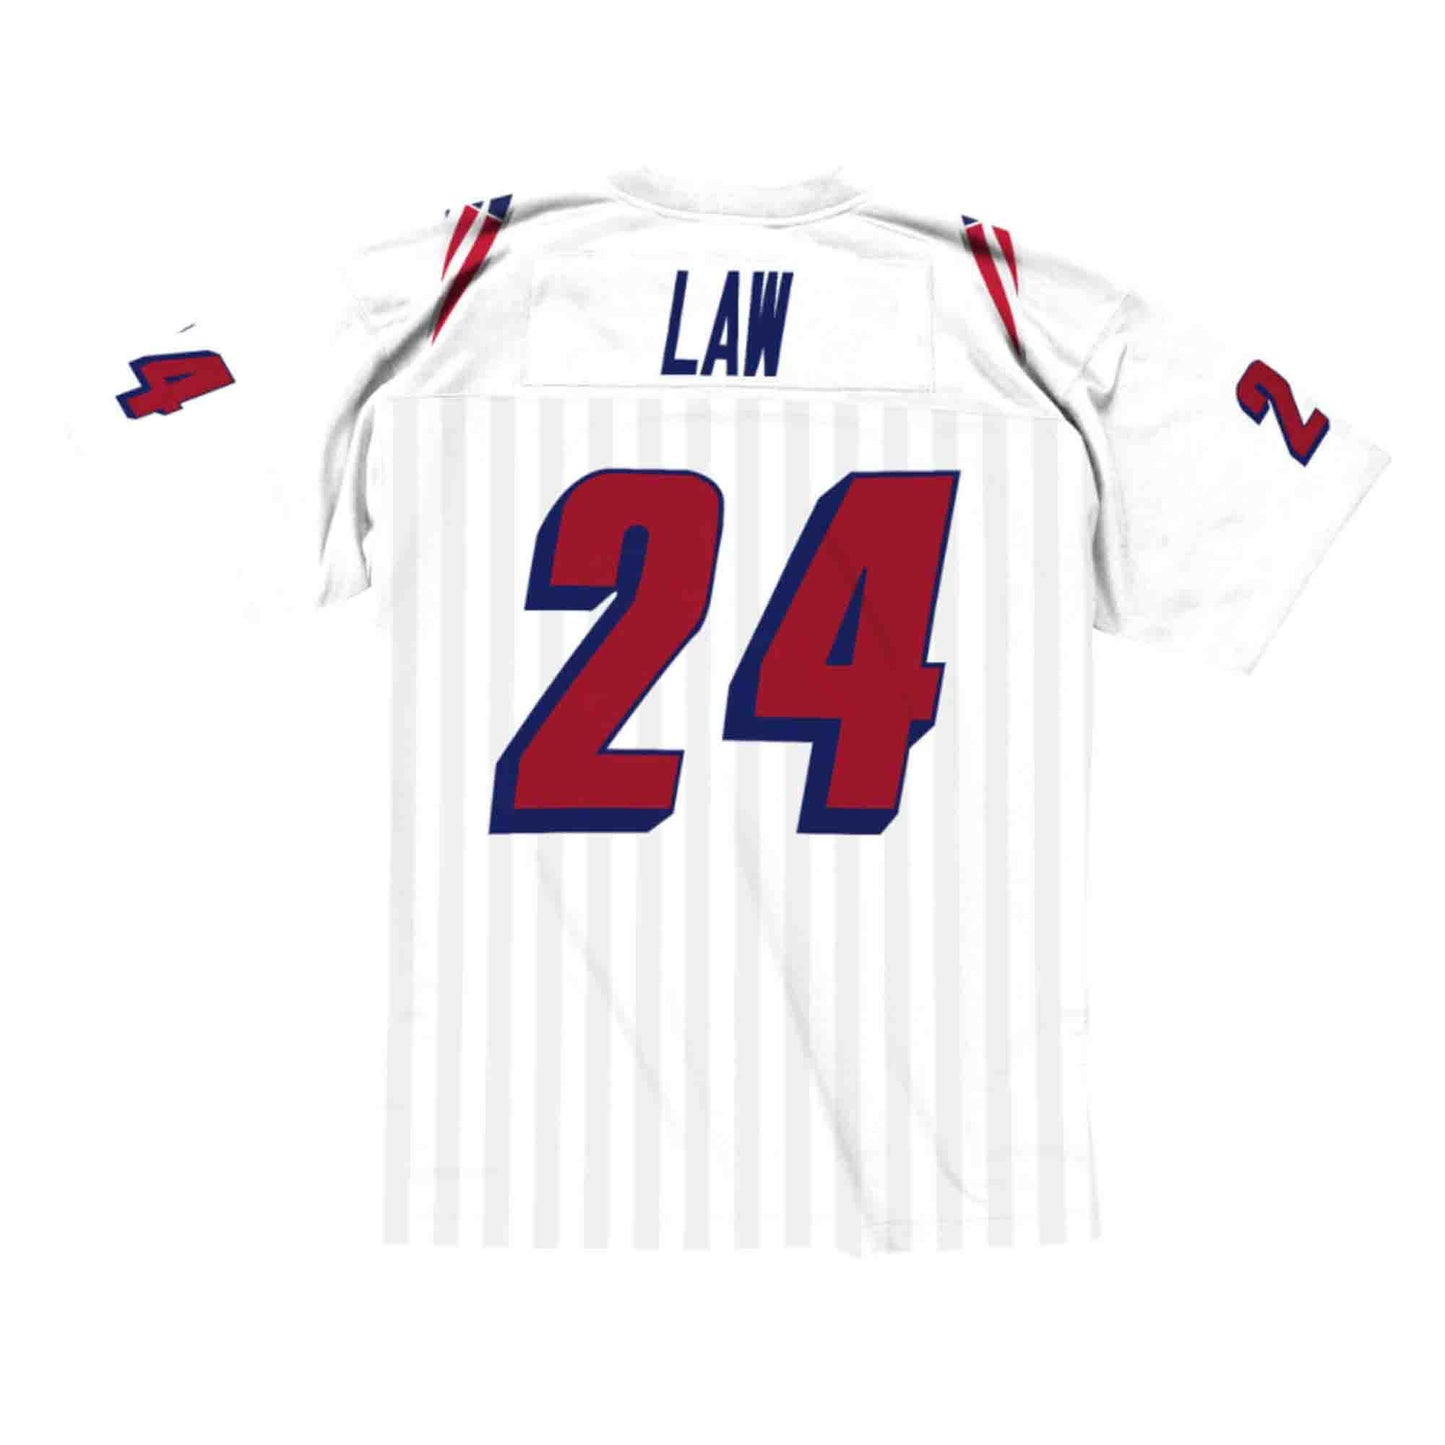 NFL Legacy Jersey New England Patriots 1995 Ty Law #24